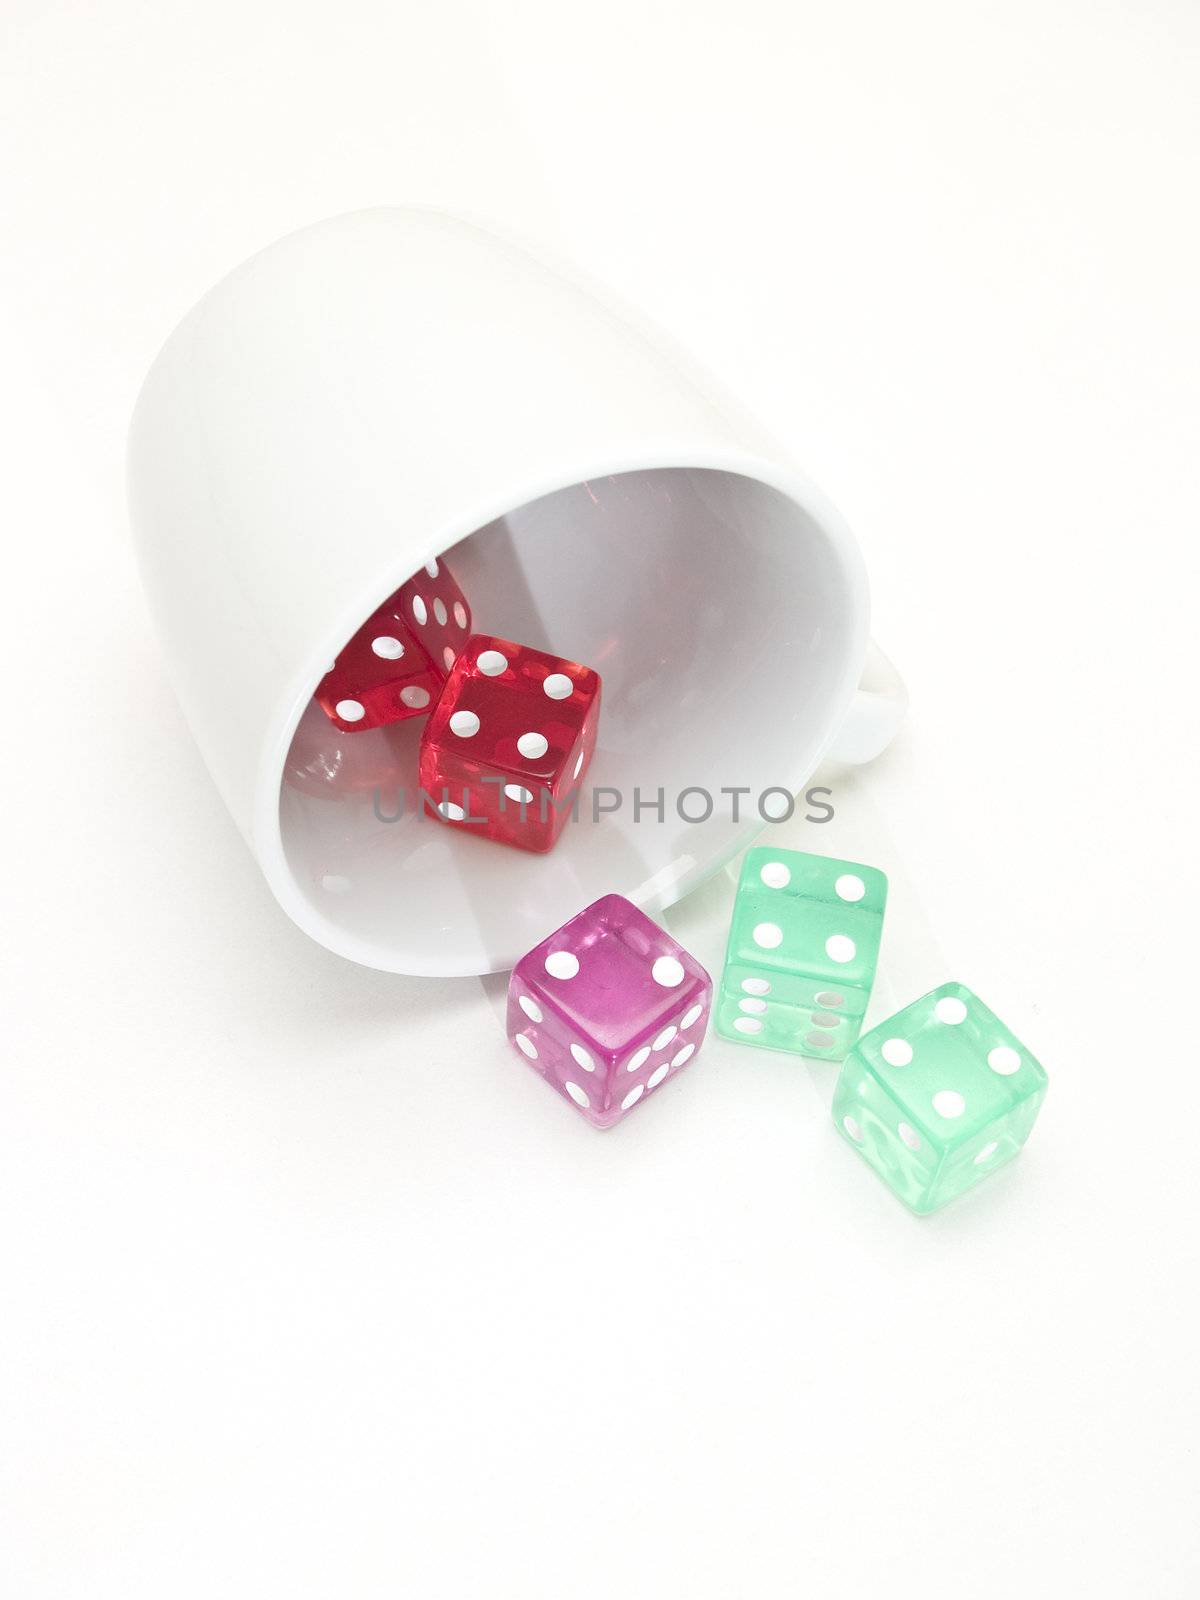  cup and dice